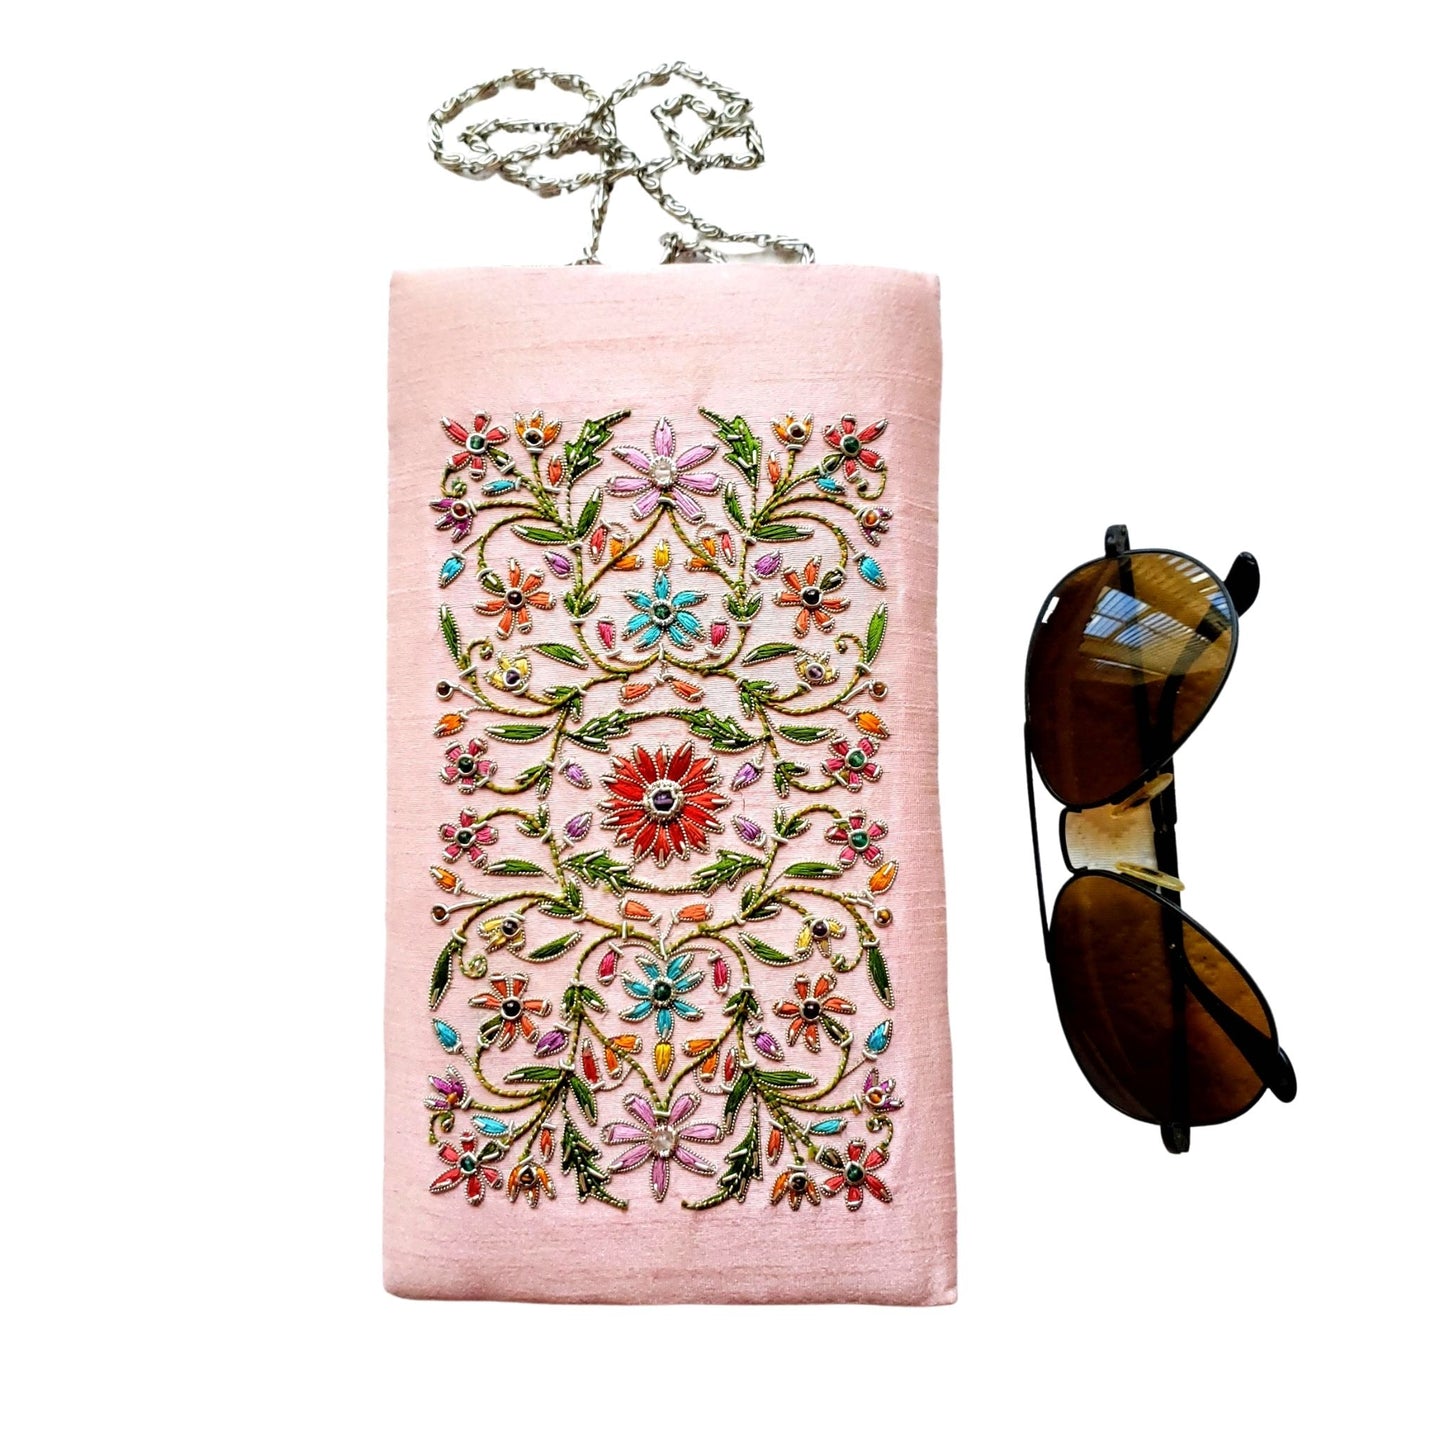 Pink silk soft eyeglasses case, sunglasses case, hand embroidered with multicolor flowers.